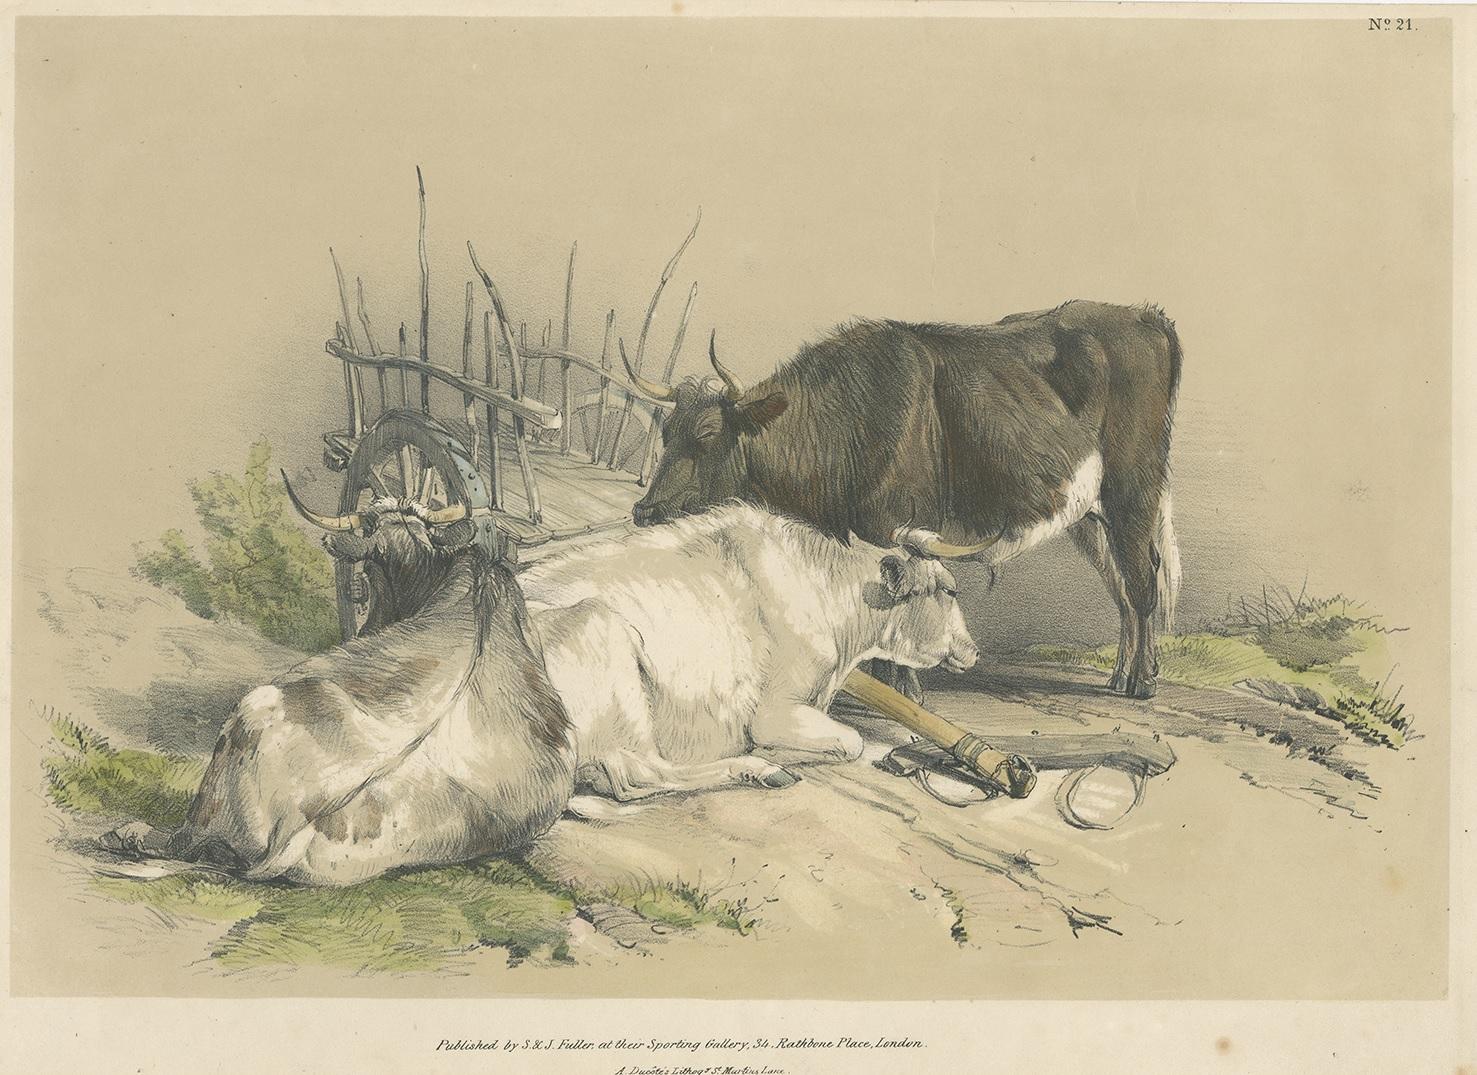 Antique print of cattle and a cart. Published by Sand J. Fuller at their Sporting Gallery, 34, Rathbone Place, London. Lithographed by Ducôte.